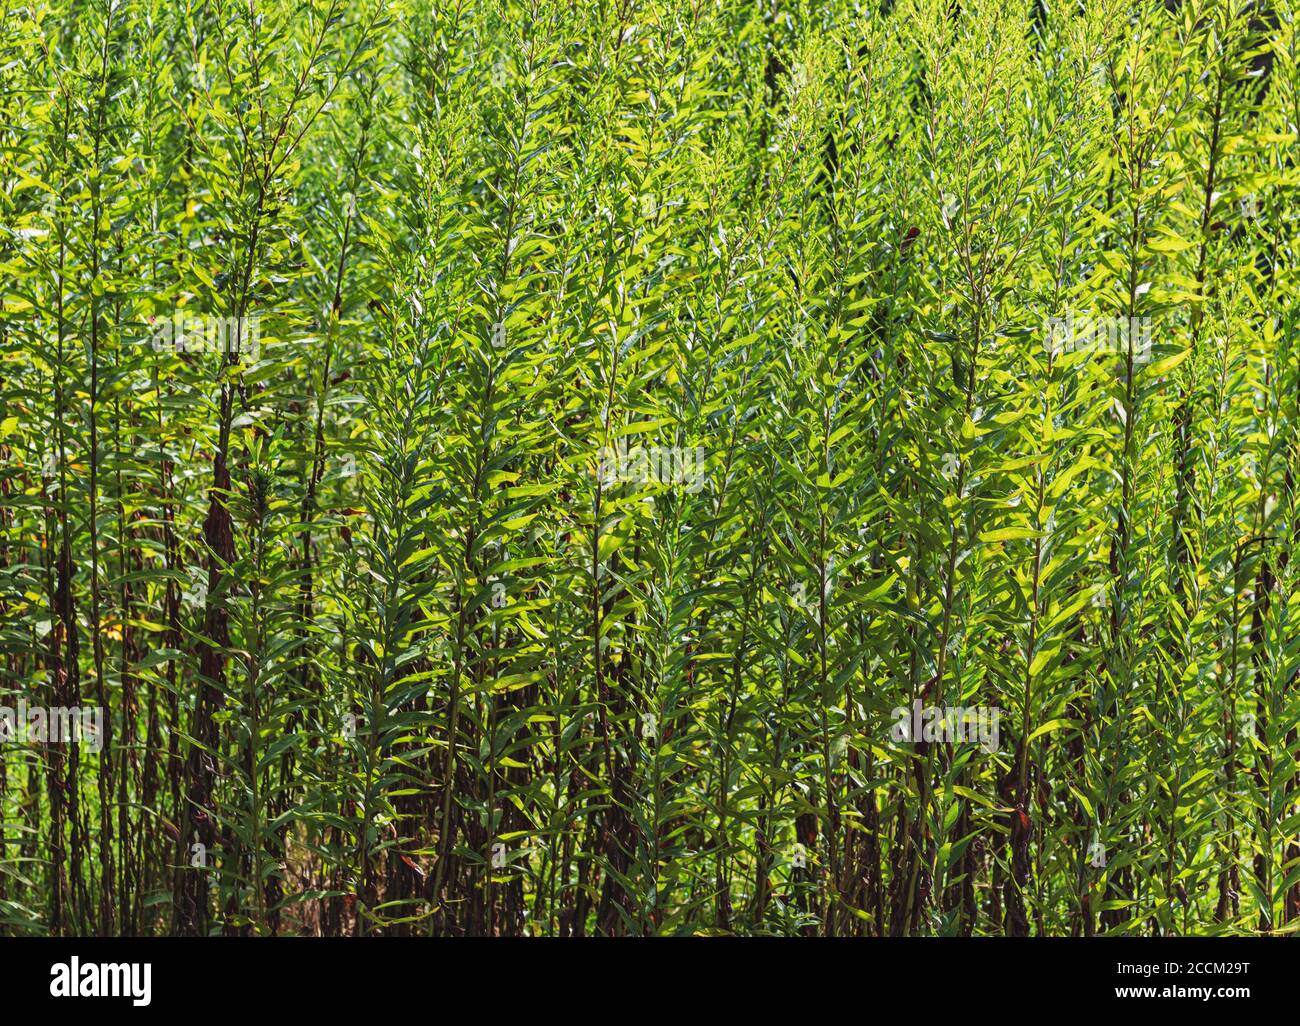 Tall weeds backlit by the sun create a dappled and vibrant background Stock Photo